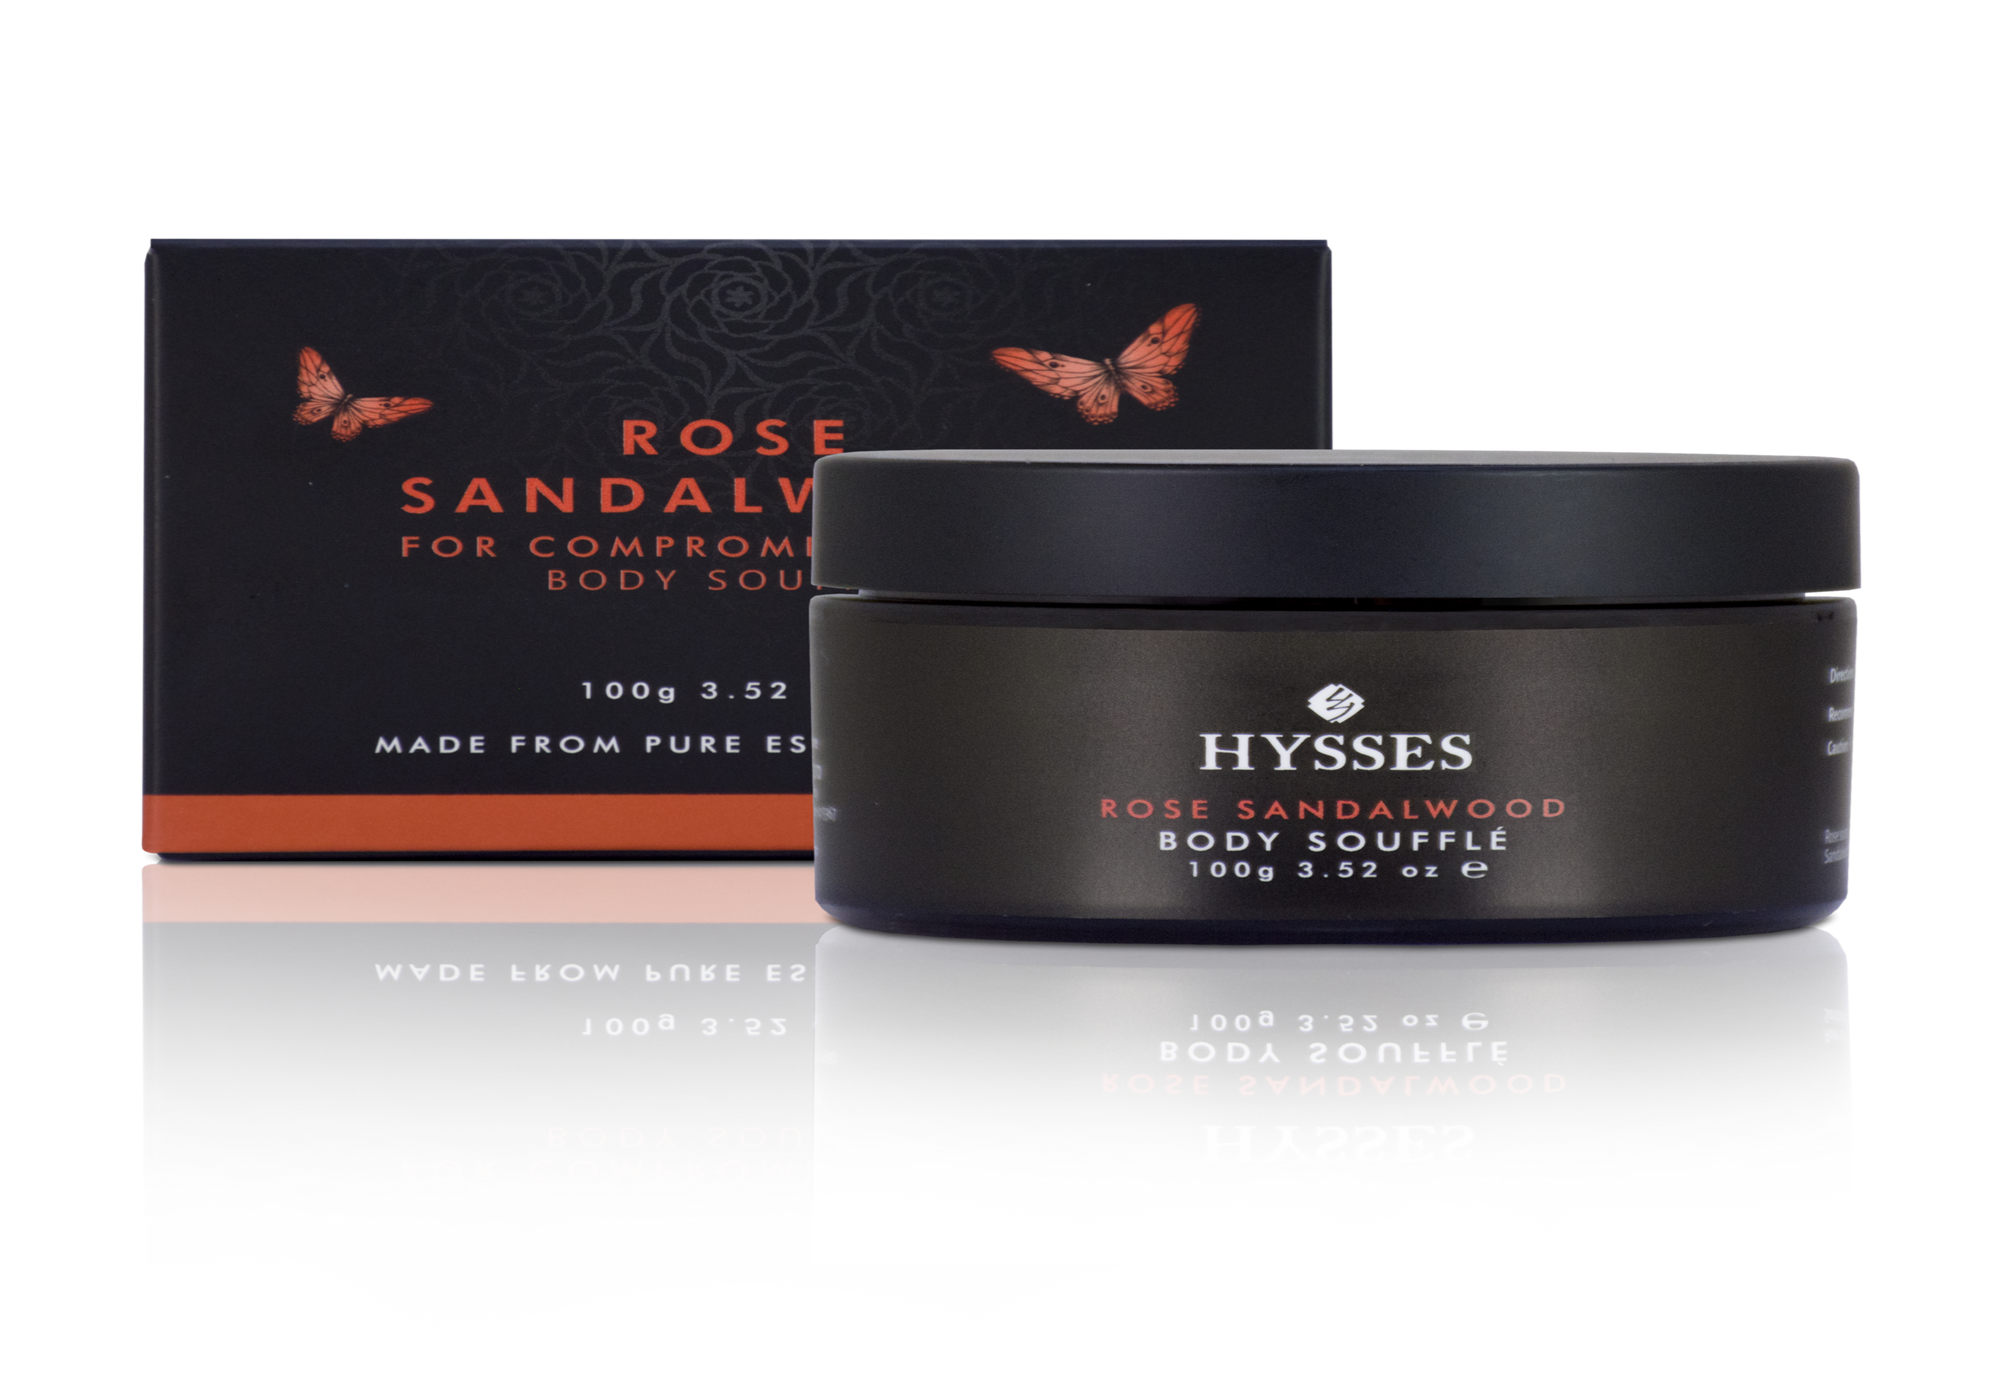 What Is Rose Sandalwood Body Soufflé?